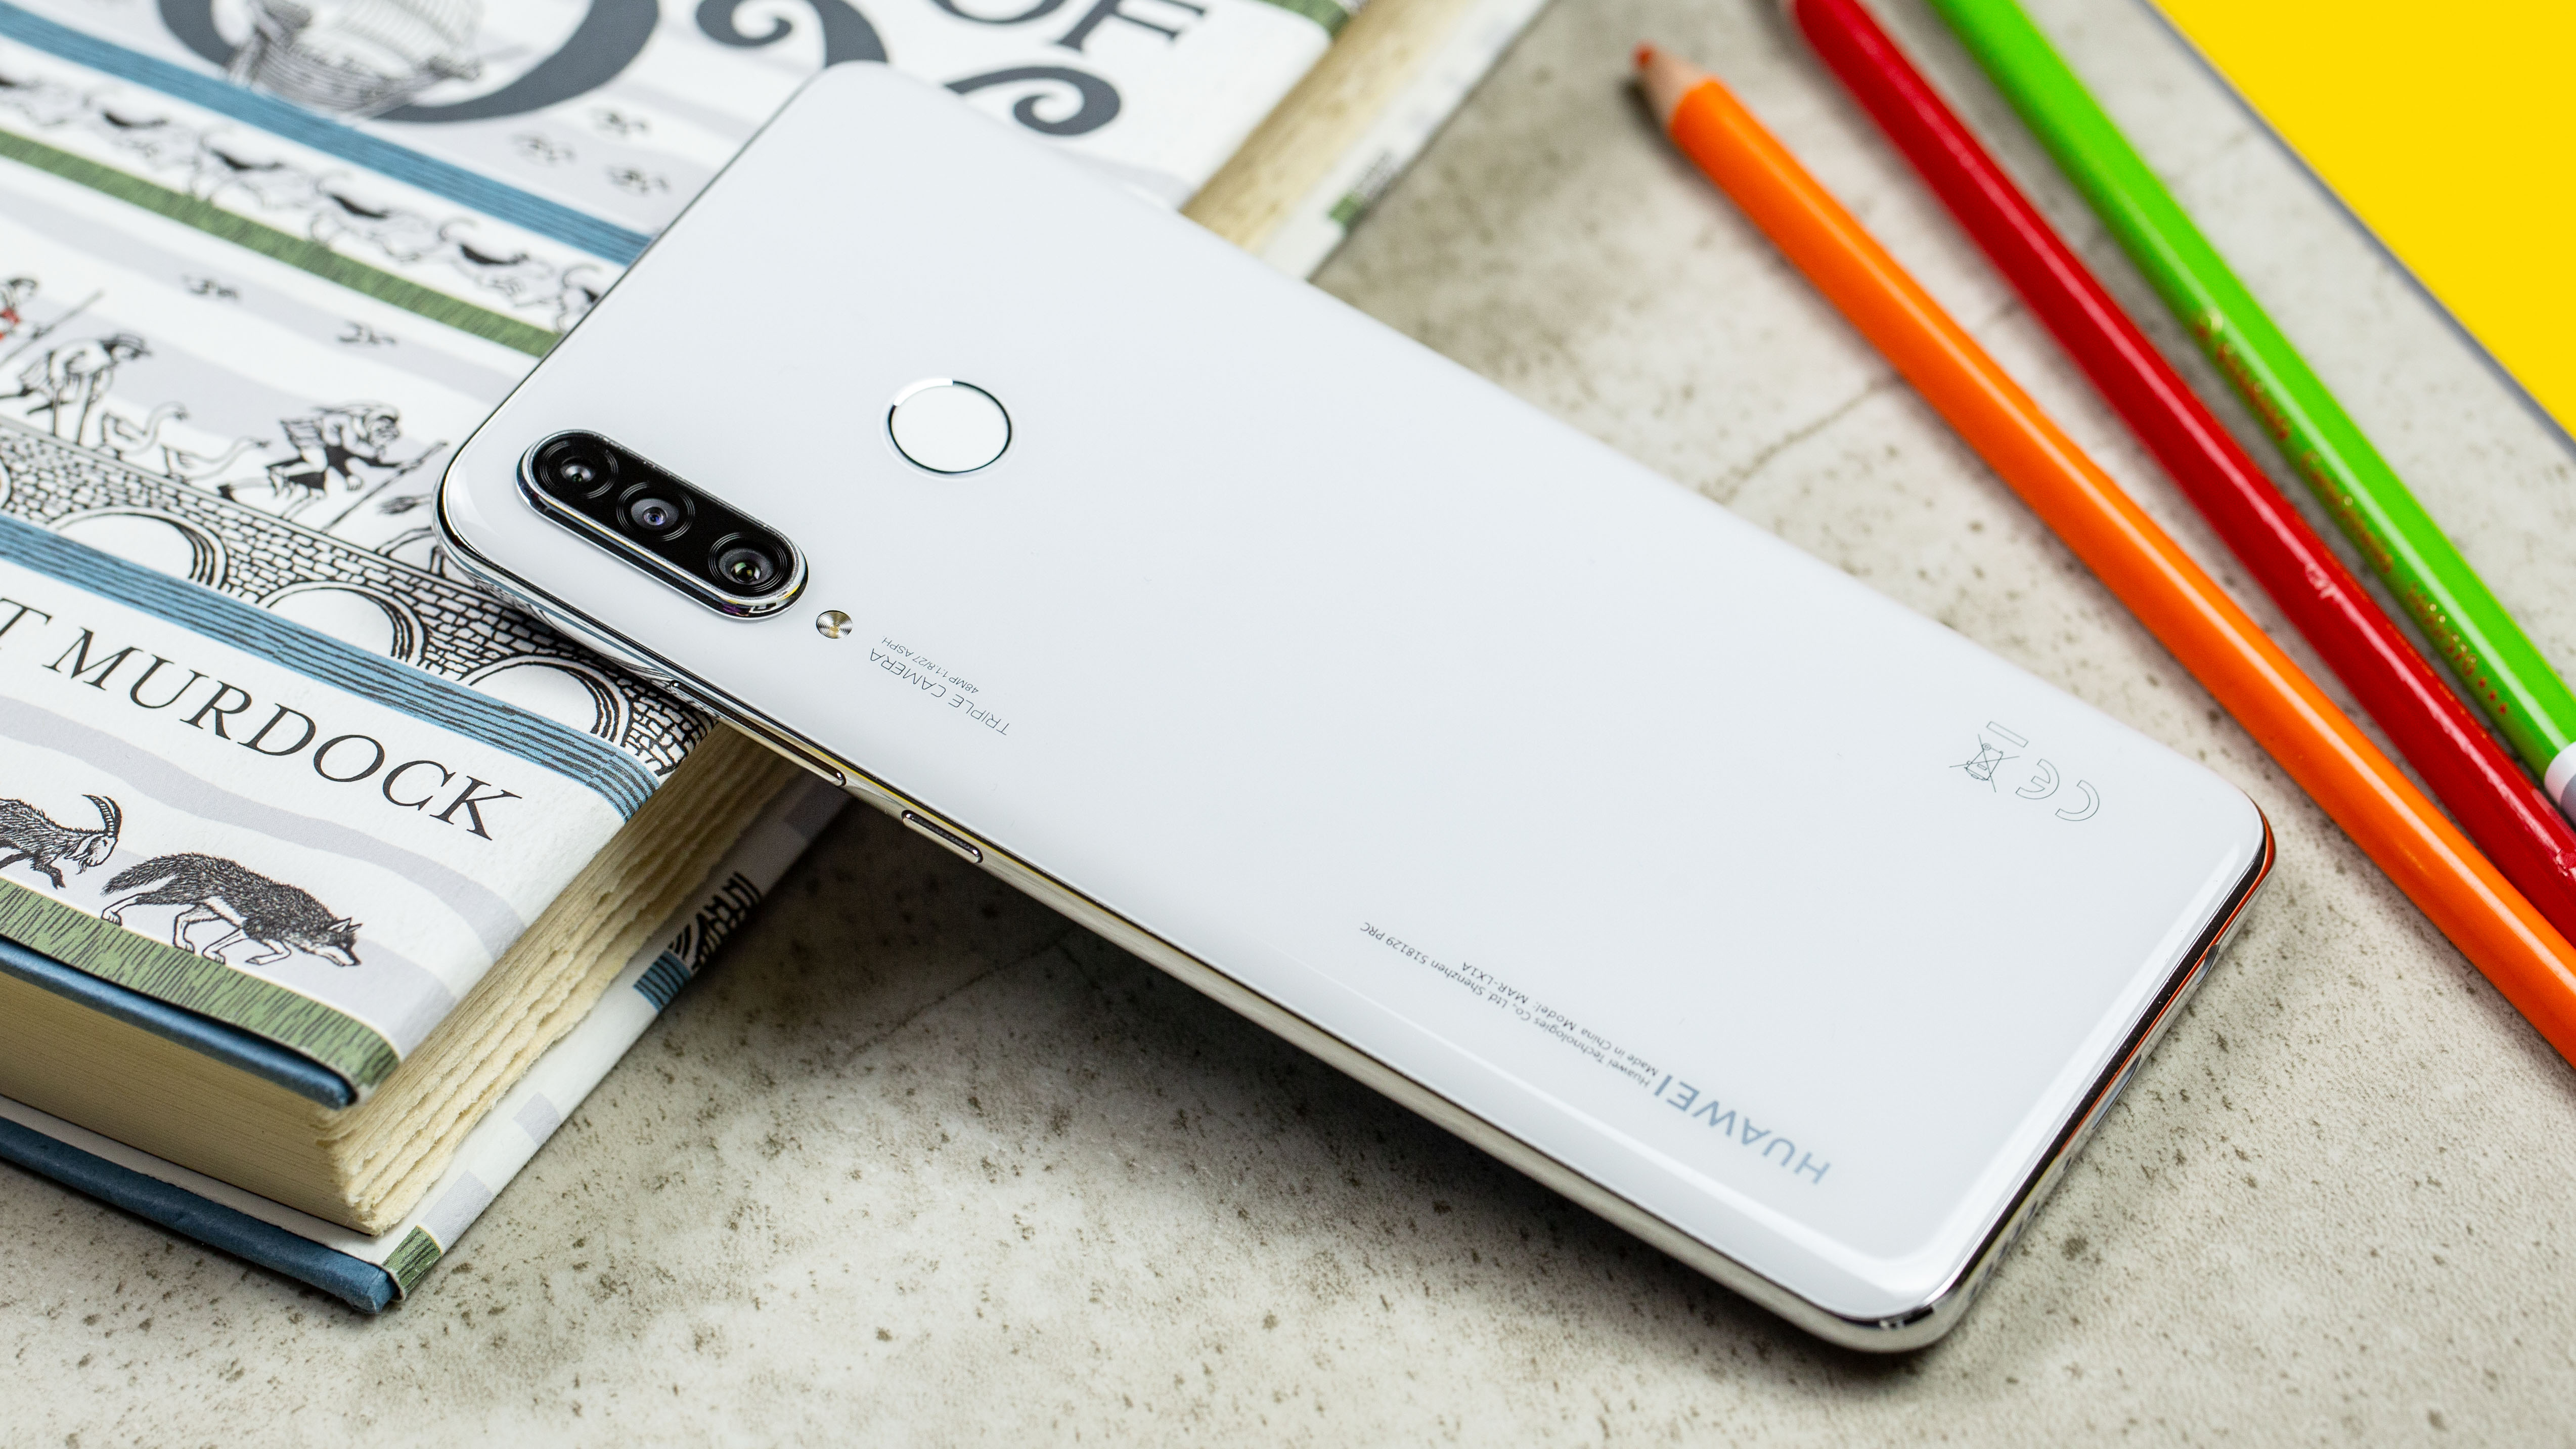 Huawei P30 Lite hands-on: it looks the part | NextPit